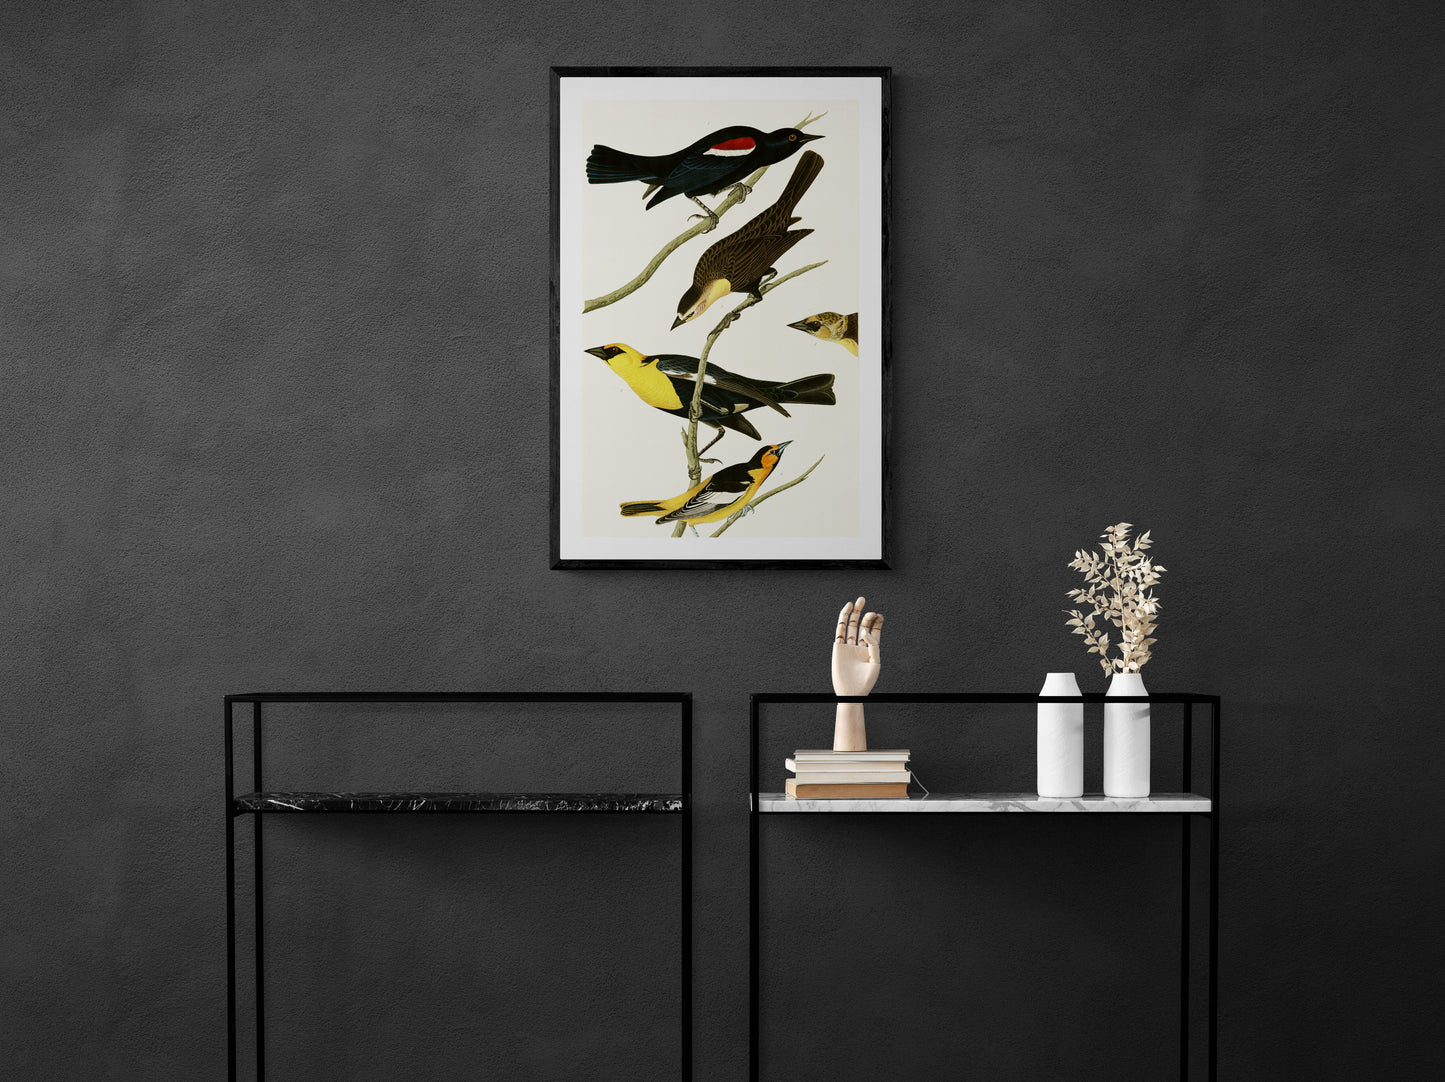 Vintage naturalistic bird illustrations: Nuttall's Starling, Yellow-headed Troopial and Bullock's Oriole. Prints on art paper, canvas, and framed canvas. Free shipping in the USA. SKUJJA091